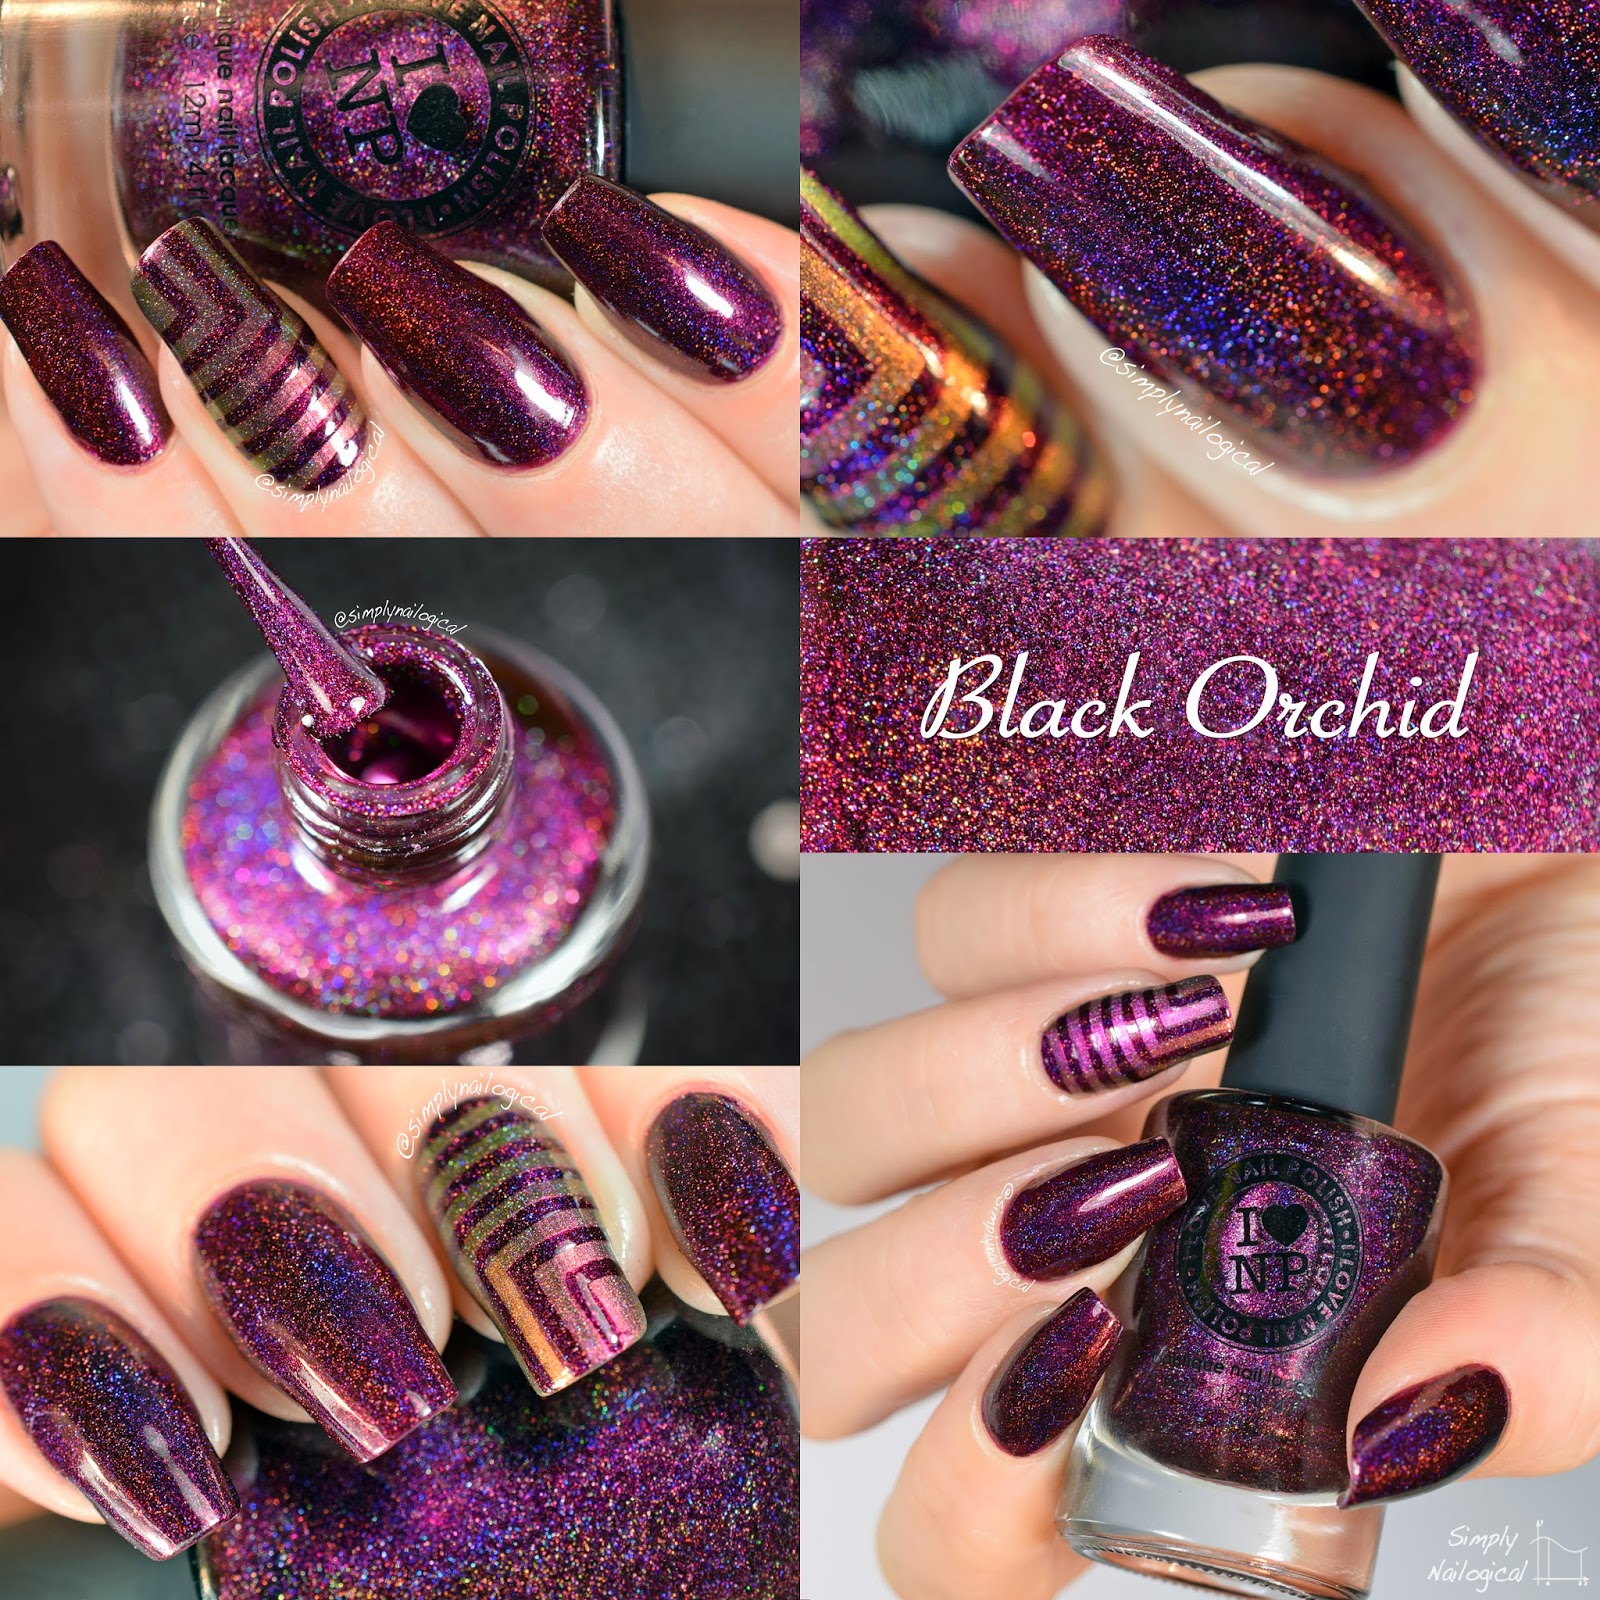 Black Orchid - ILNP Fall 2014 collection swatch